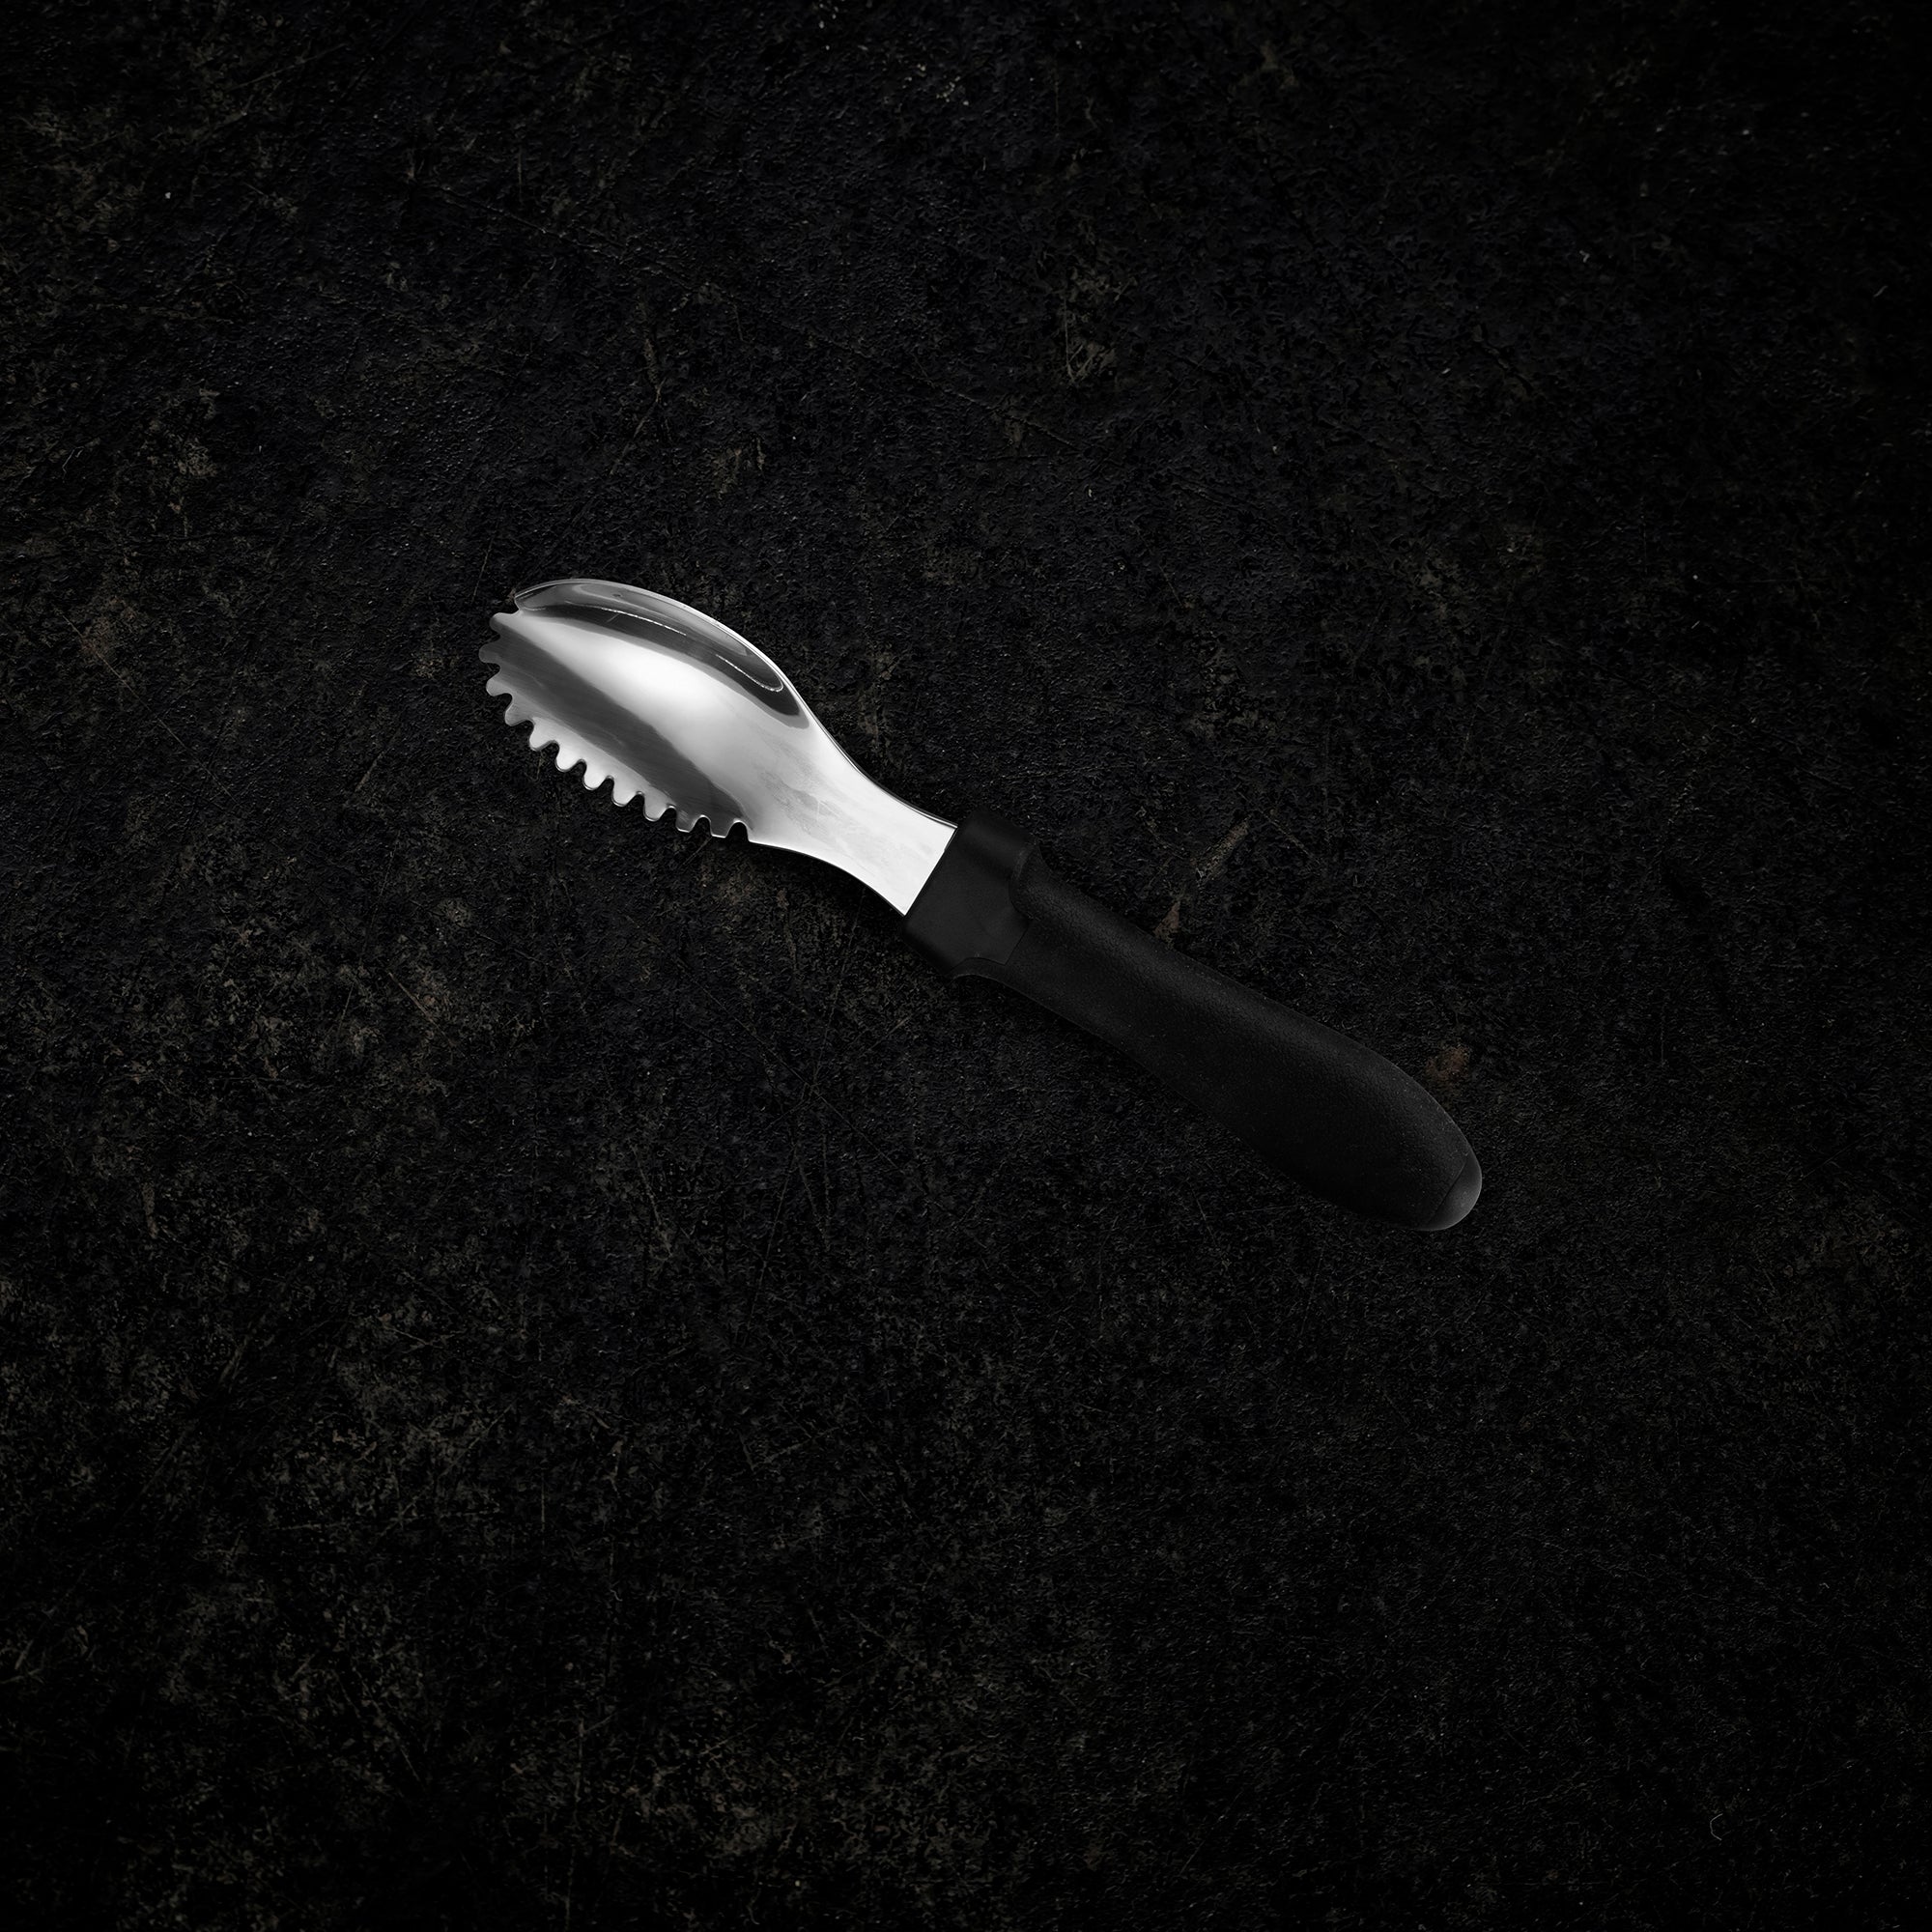 Reviews and Ratings for Messermeister Pro-Touch Teflon Spatula